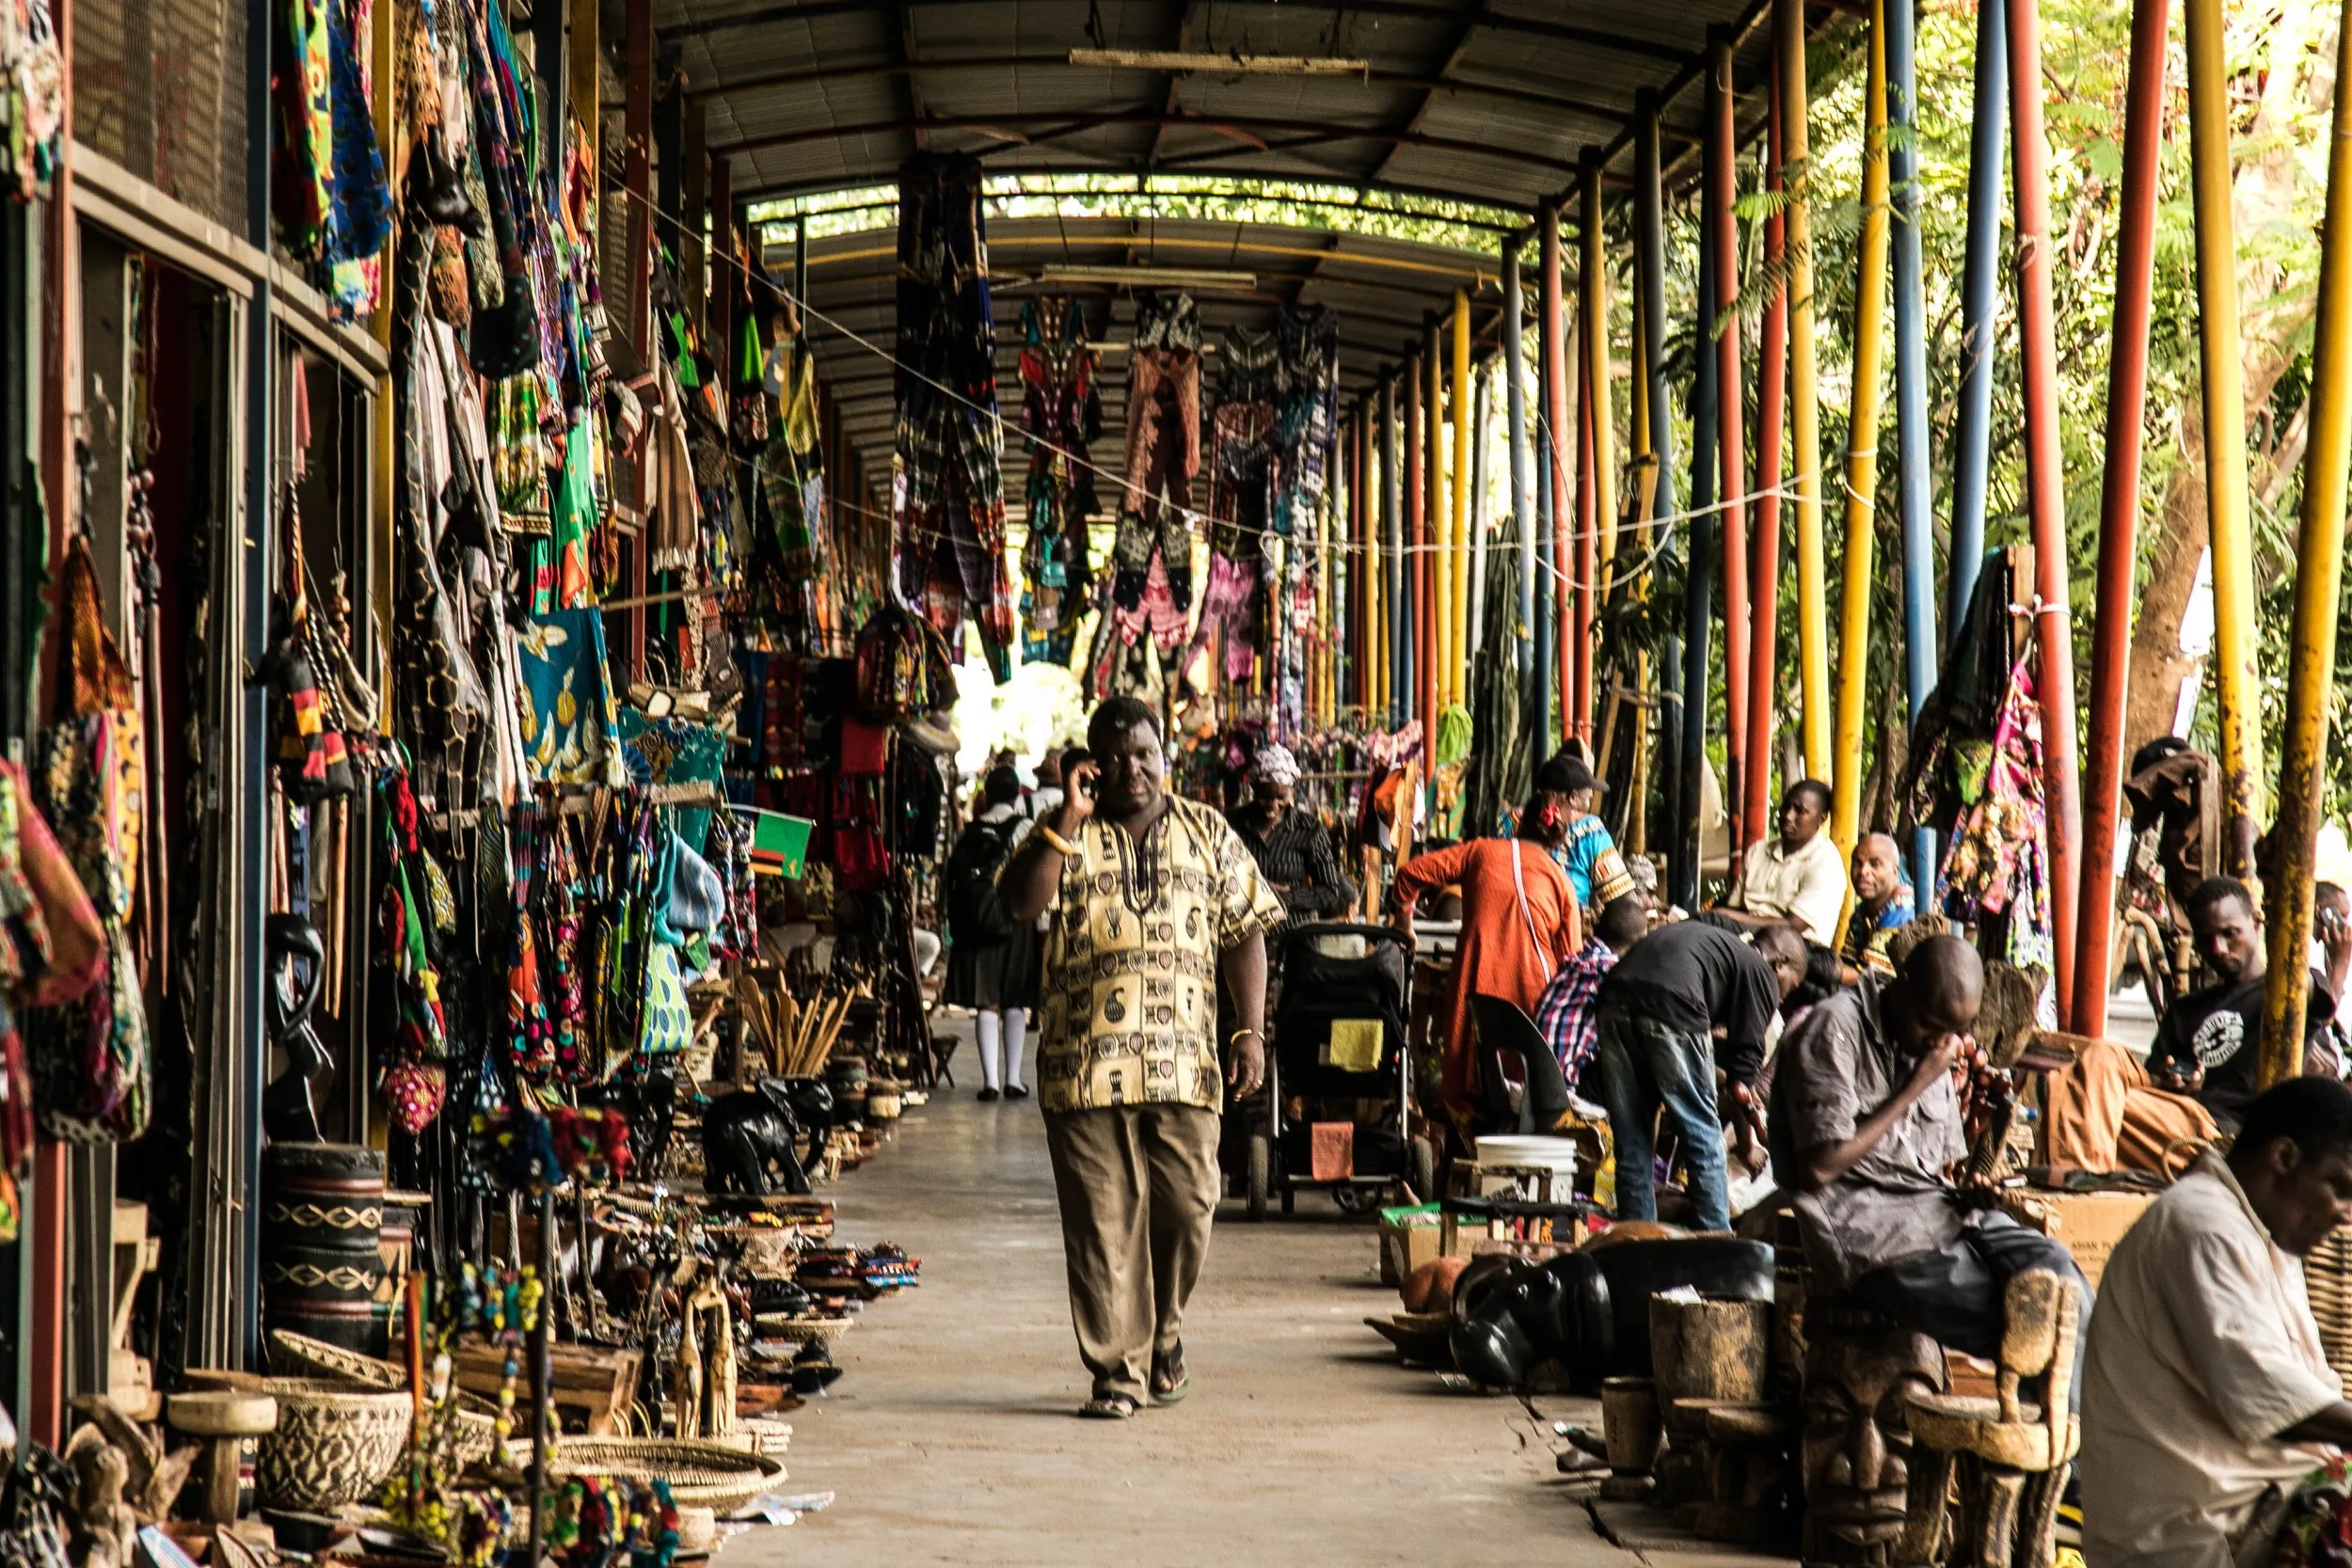 Sunday Crafts Market in Zambia, africa | Other Crafts,Handicrafts - Country Helper